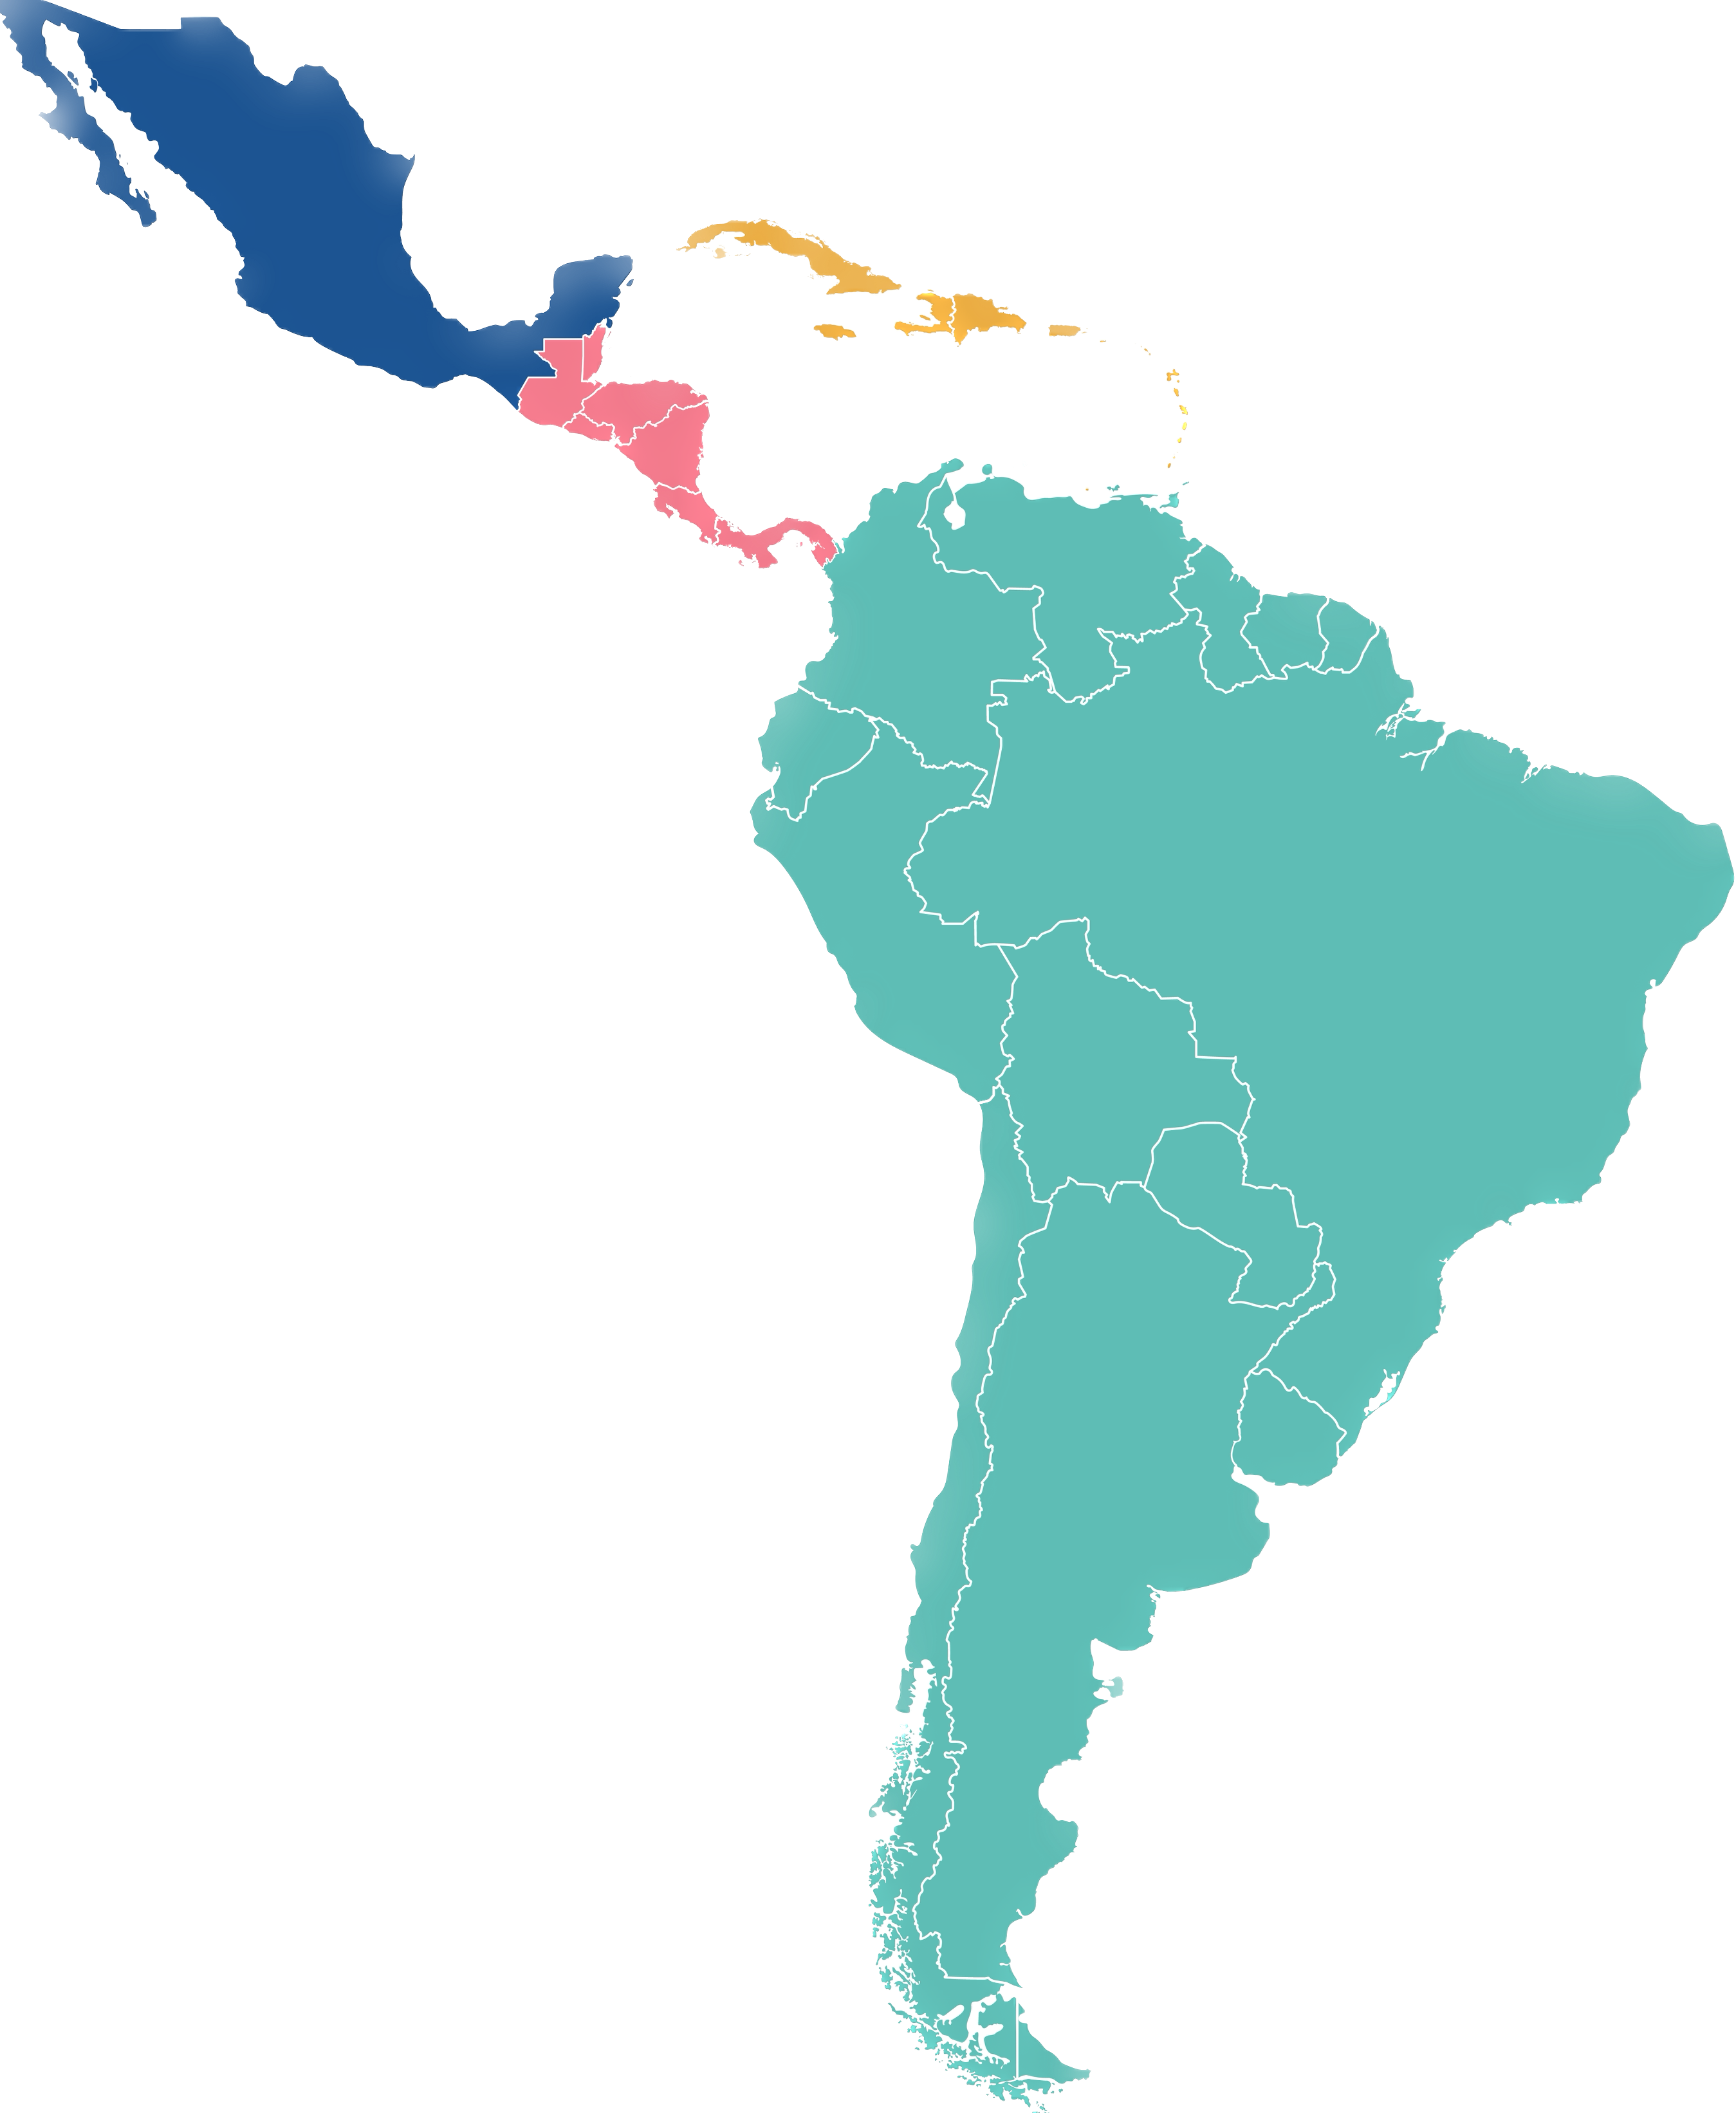 Outsourcing in LATAM